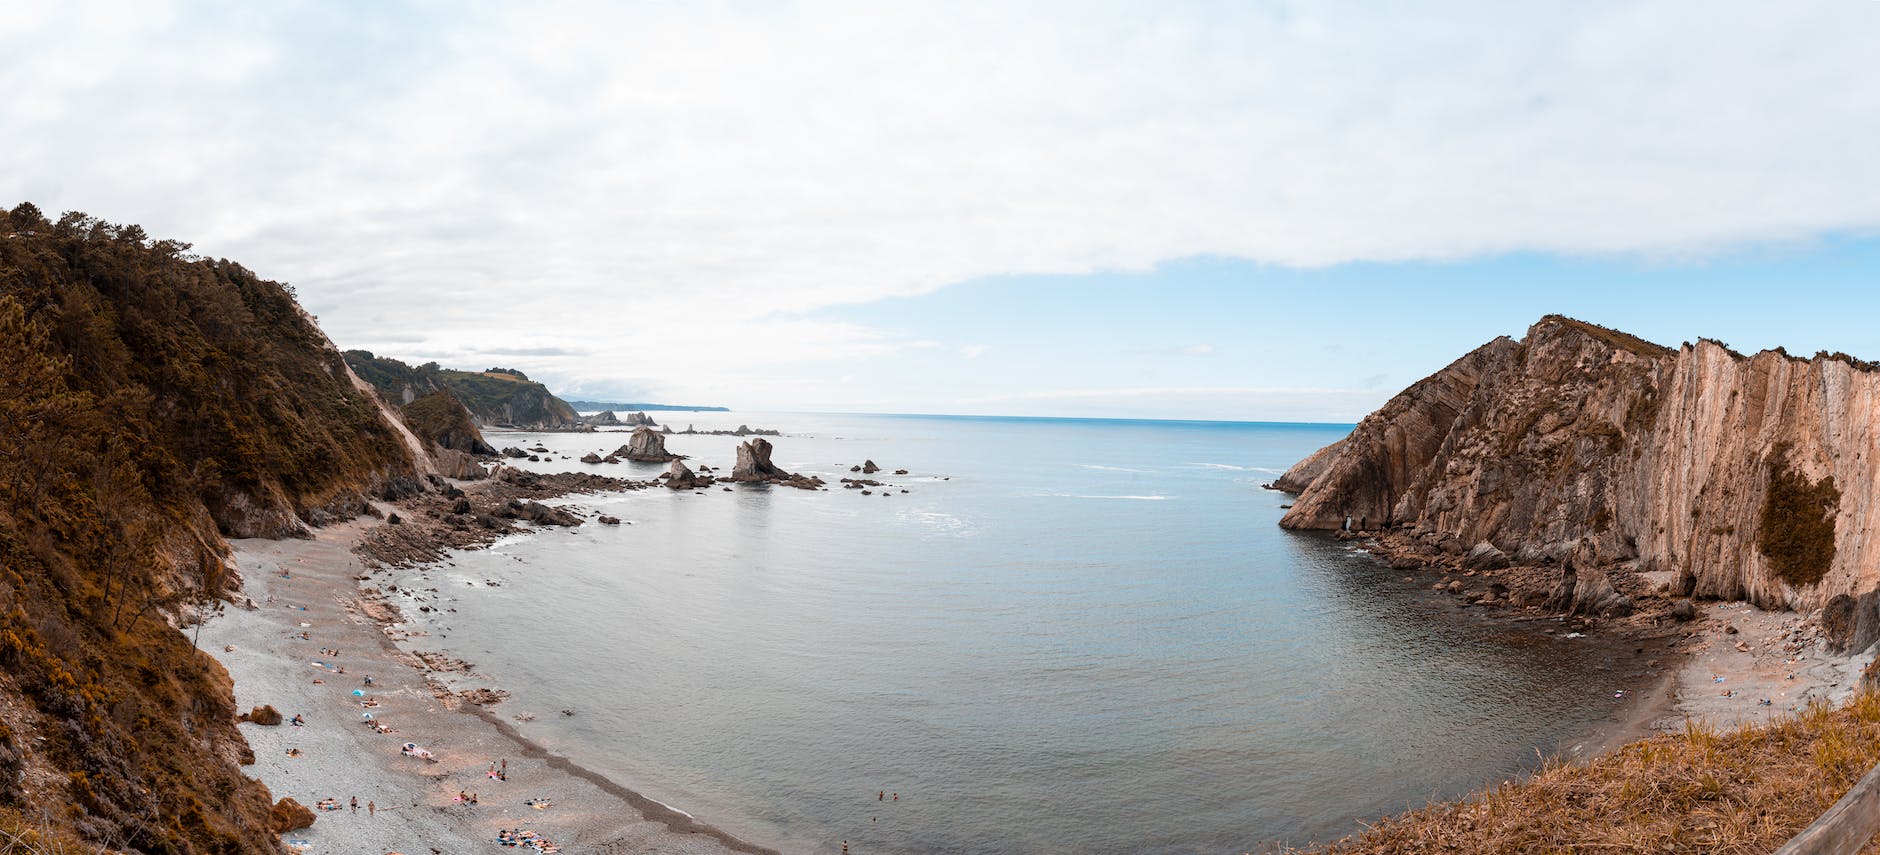 panoramic view of the silence beach in spain